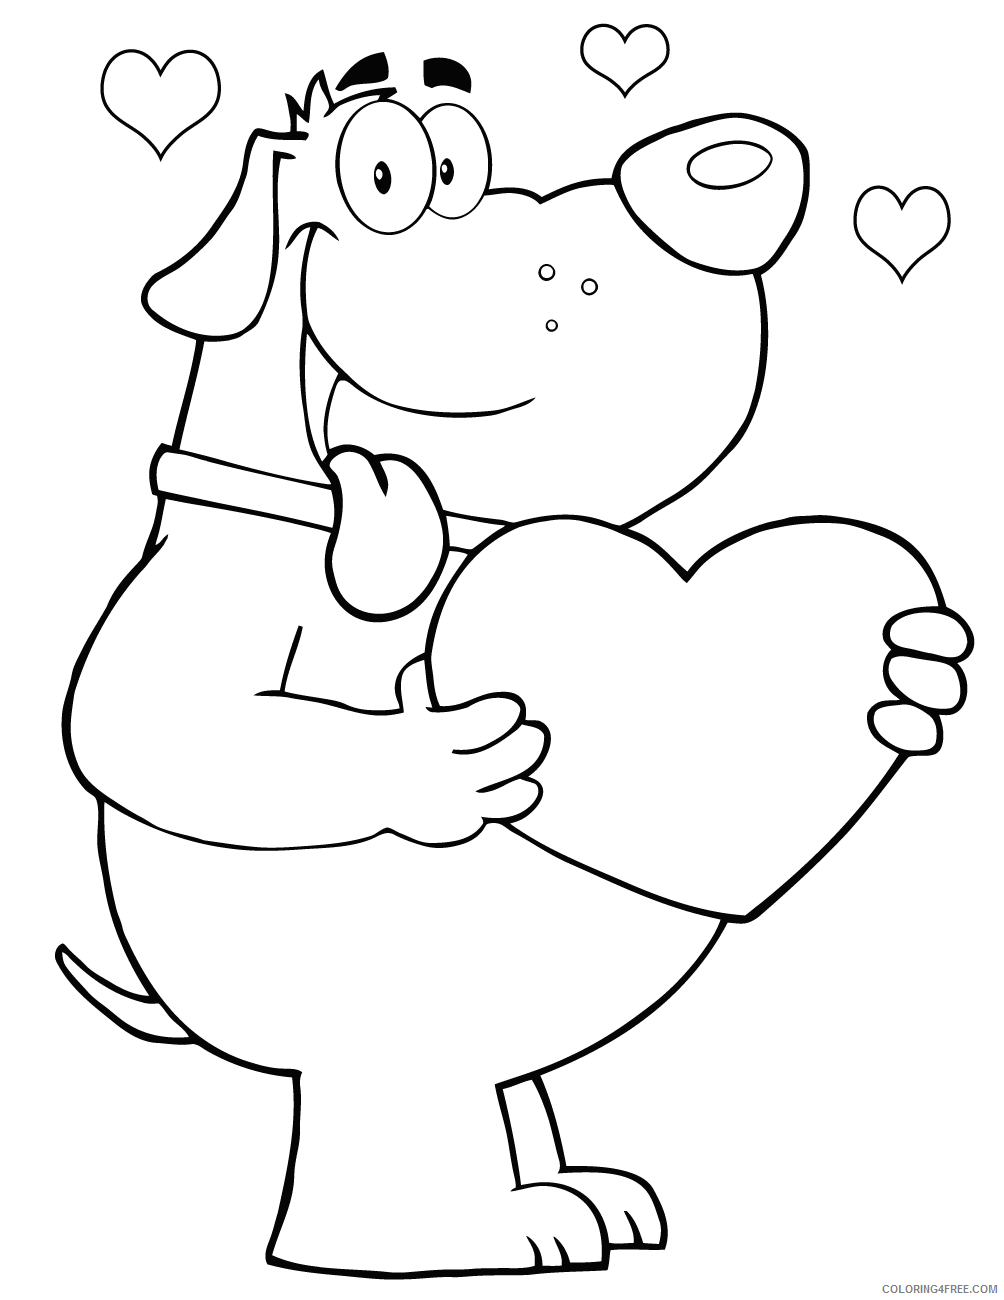 Heart Coloring Pages Doggy Heart Printable 2021 3145 Coloring4free